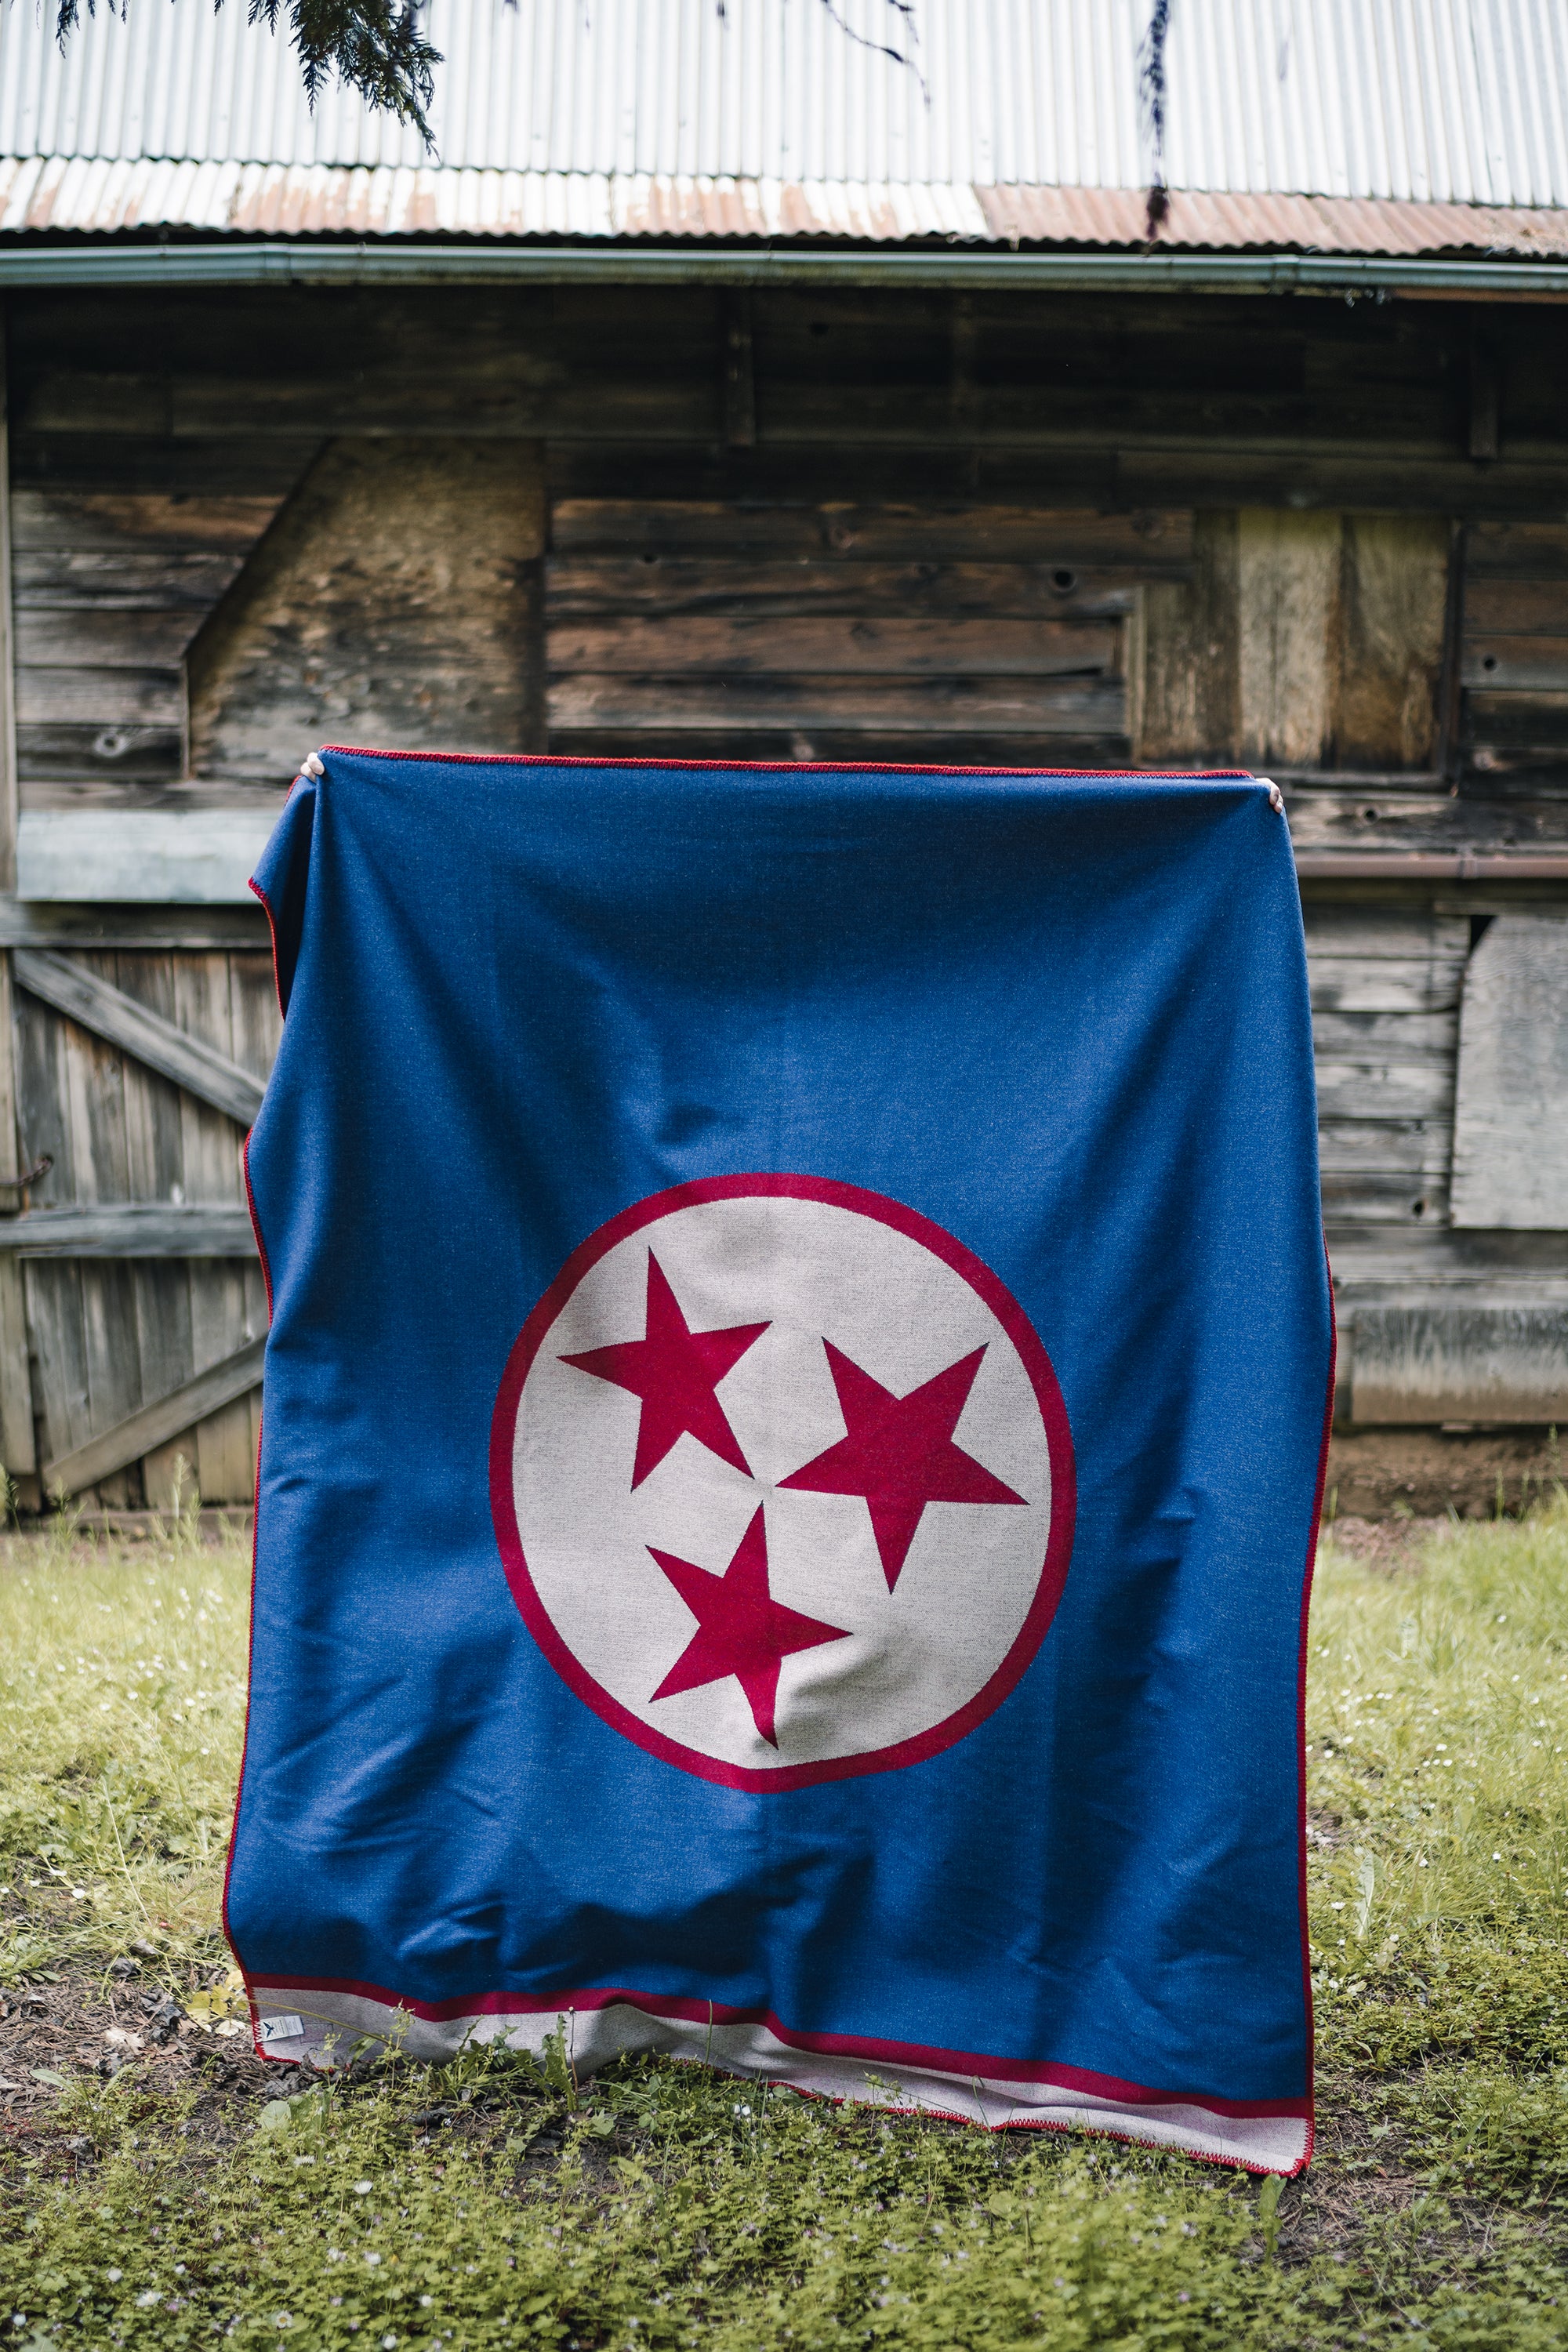 The Tennessee Blanket